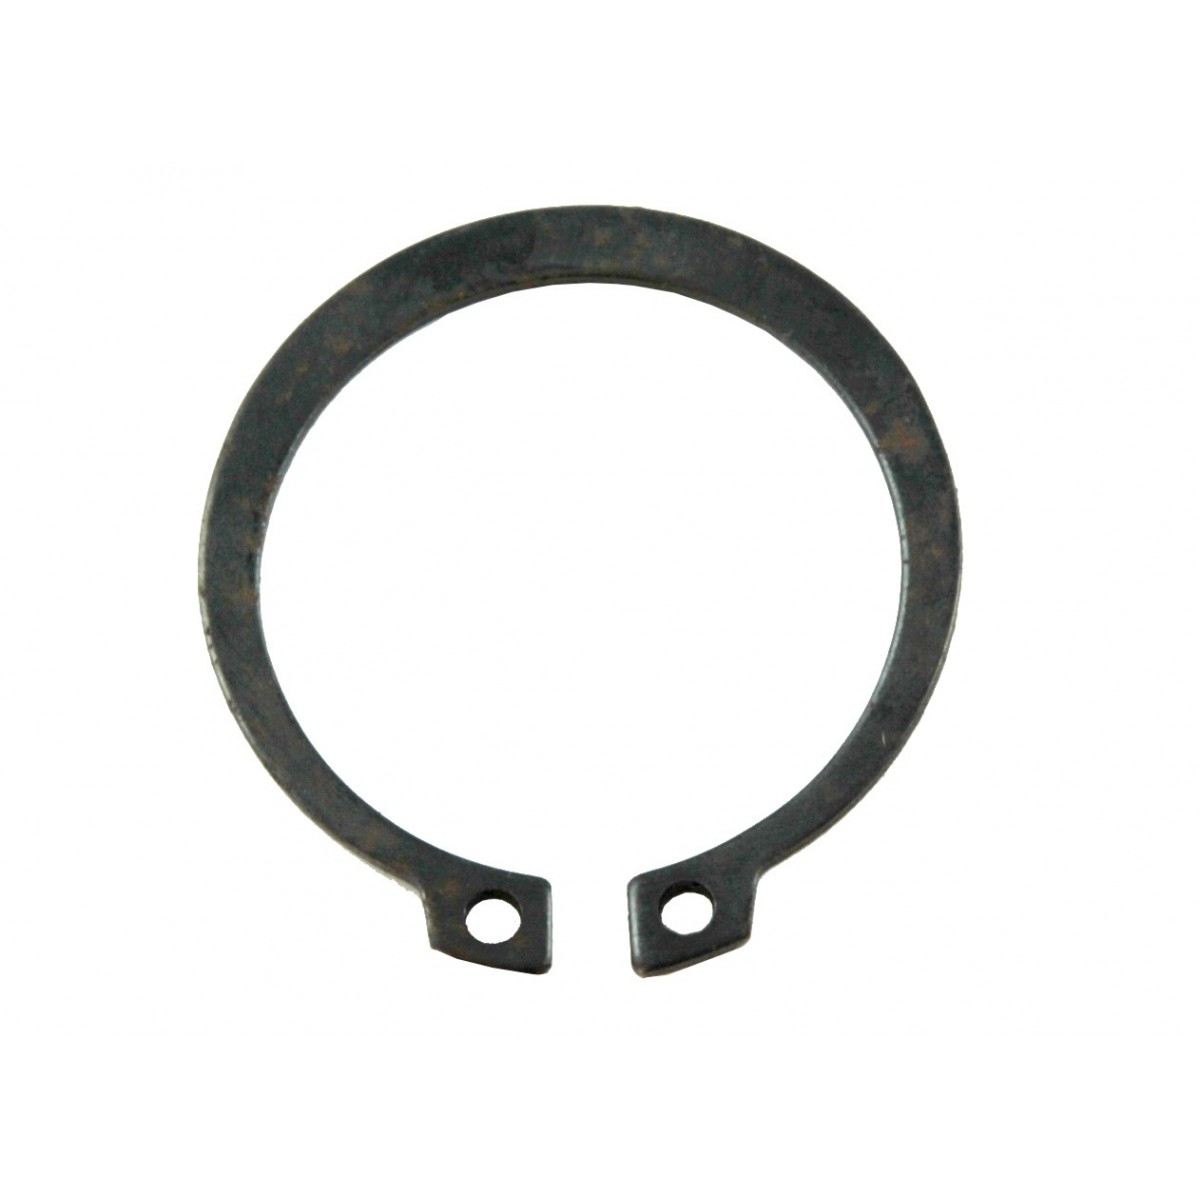 A 35x29 mm securing ring for the SB separating rotor